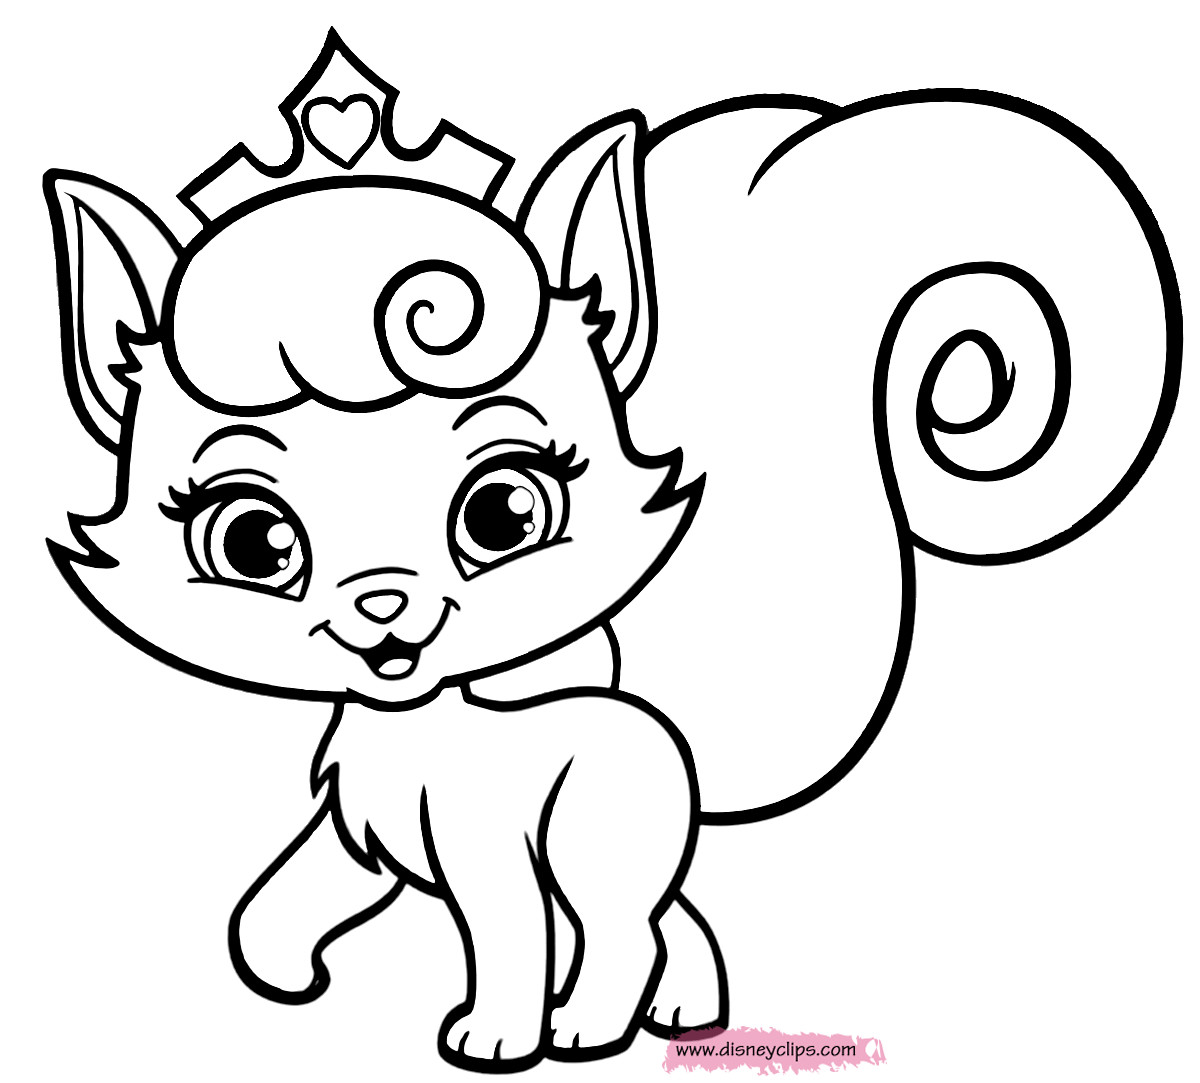 Kitten Coloring Pages For Kids
 Puppy And Kitten Coloring Pages 504 Free Printable Inside